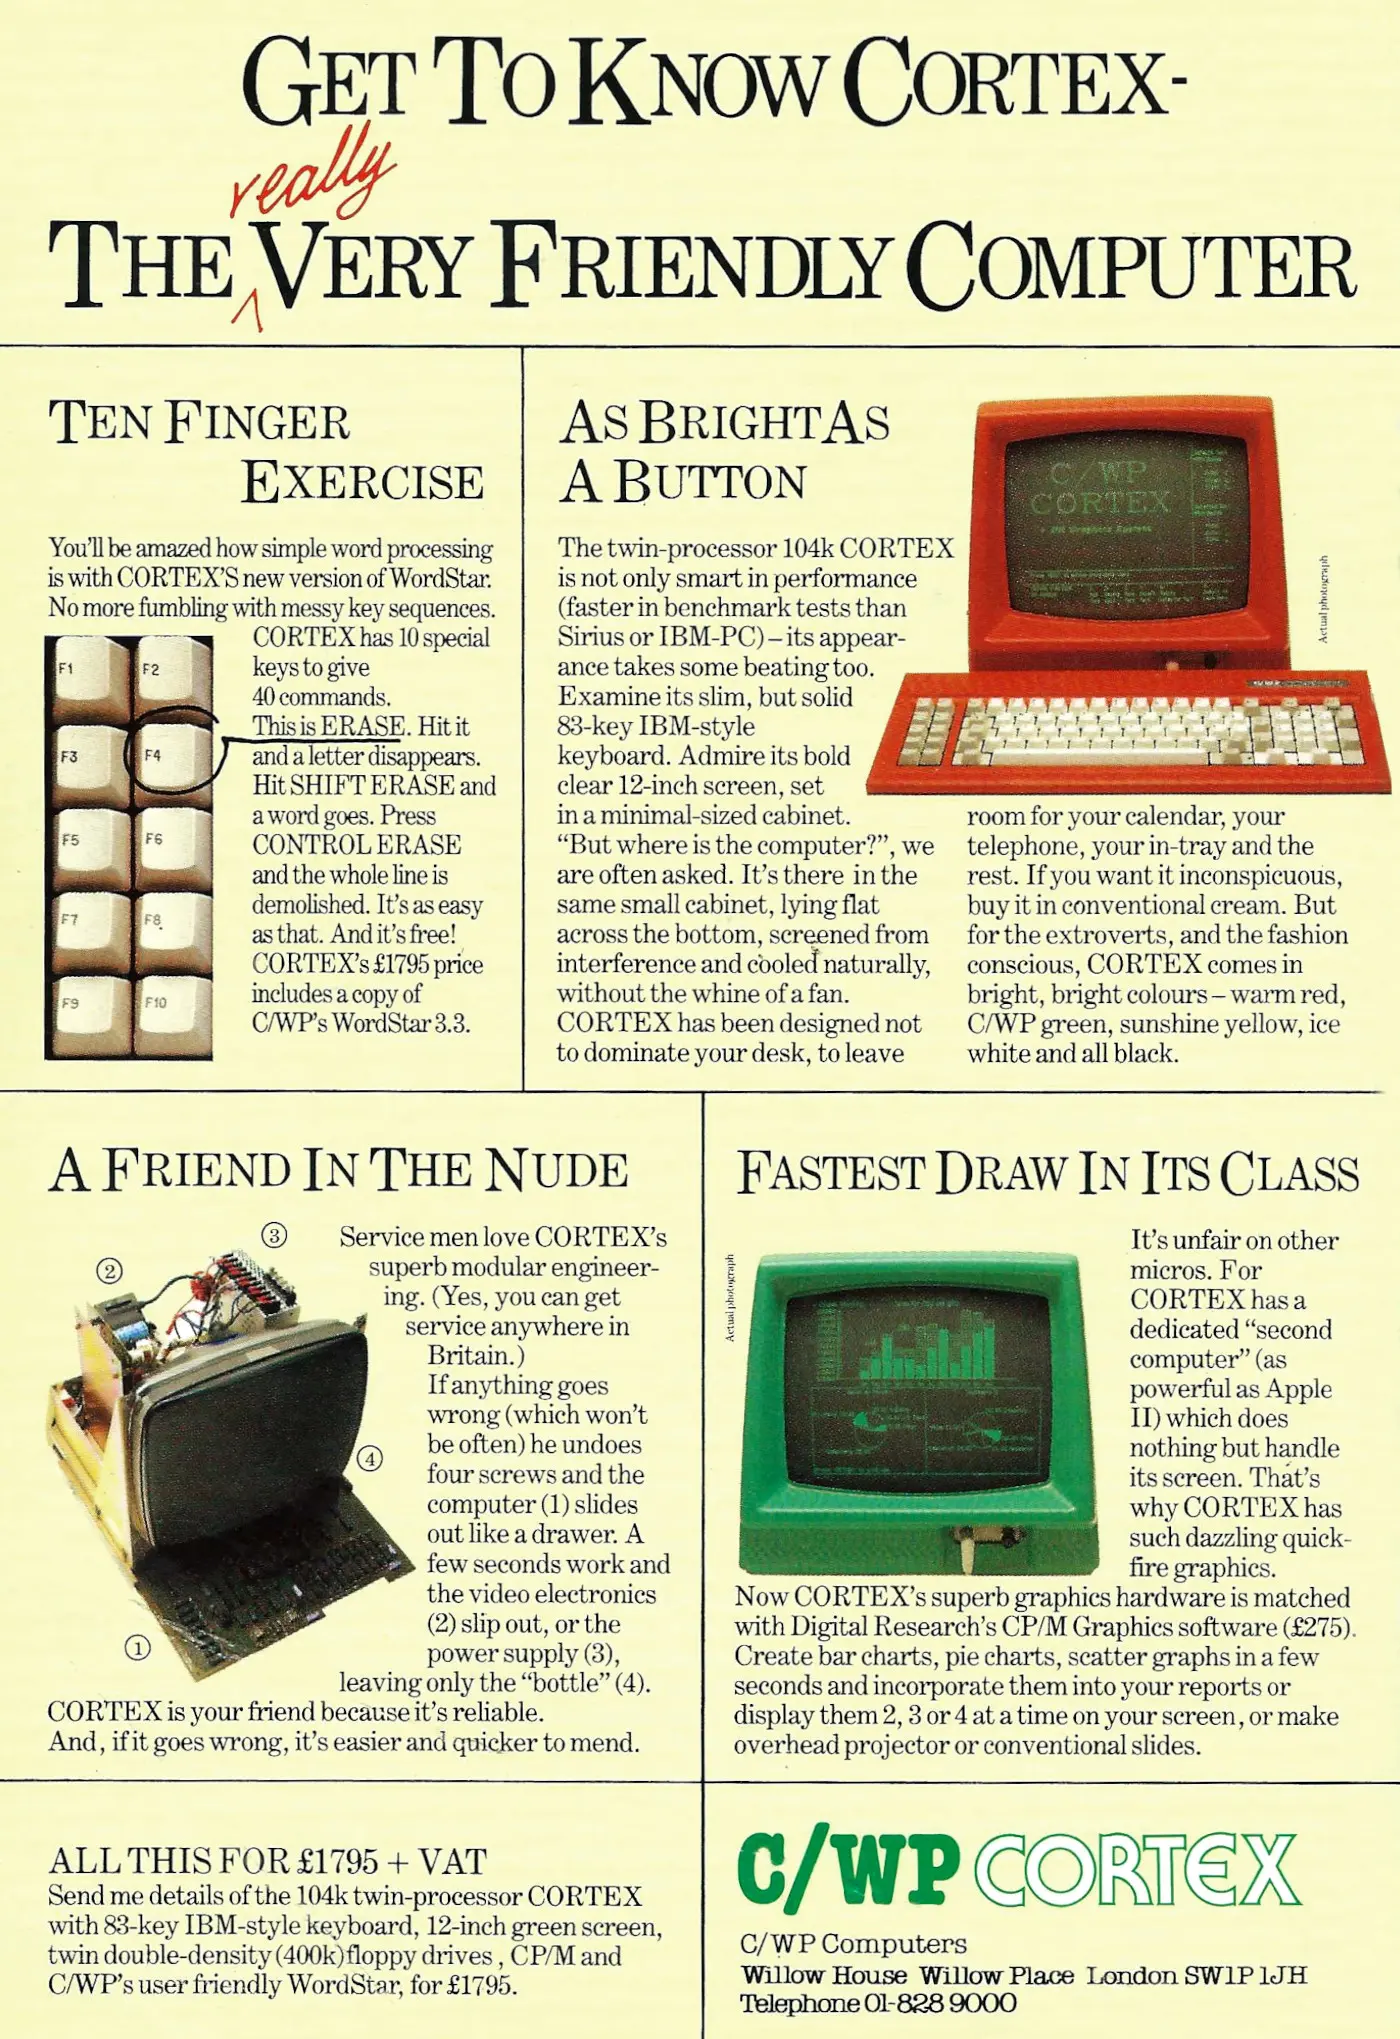 C/WP-Cortex Advert: Get to Know Cortex - the Really Very Friendly Computer, from A-Z of Personal Computers, October 1984